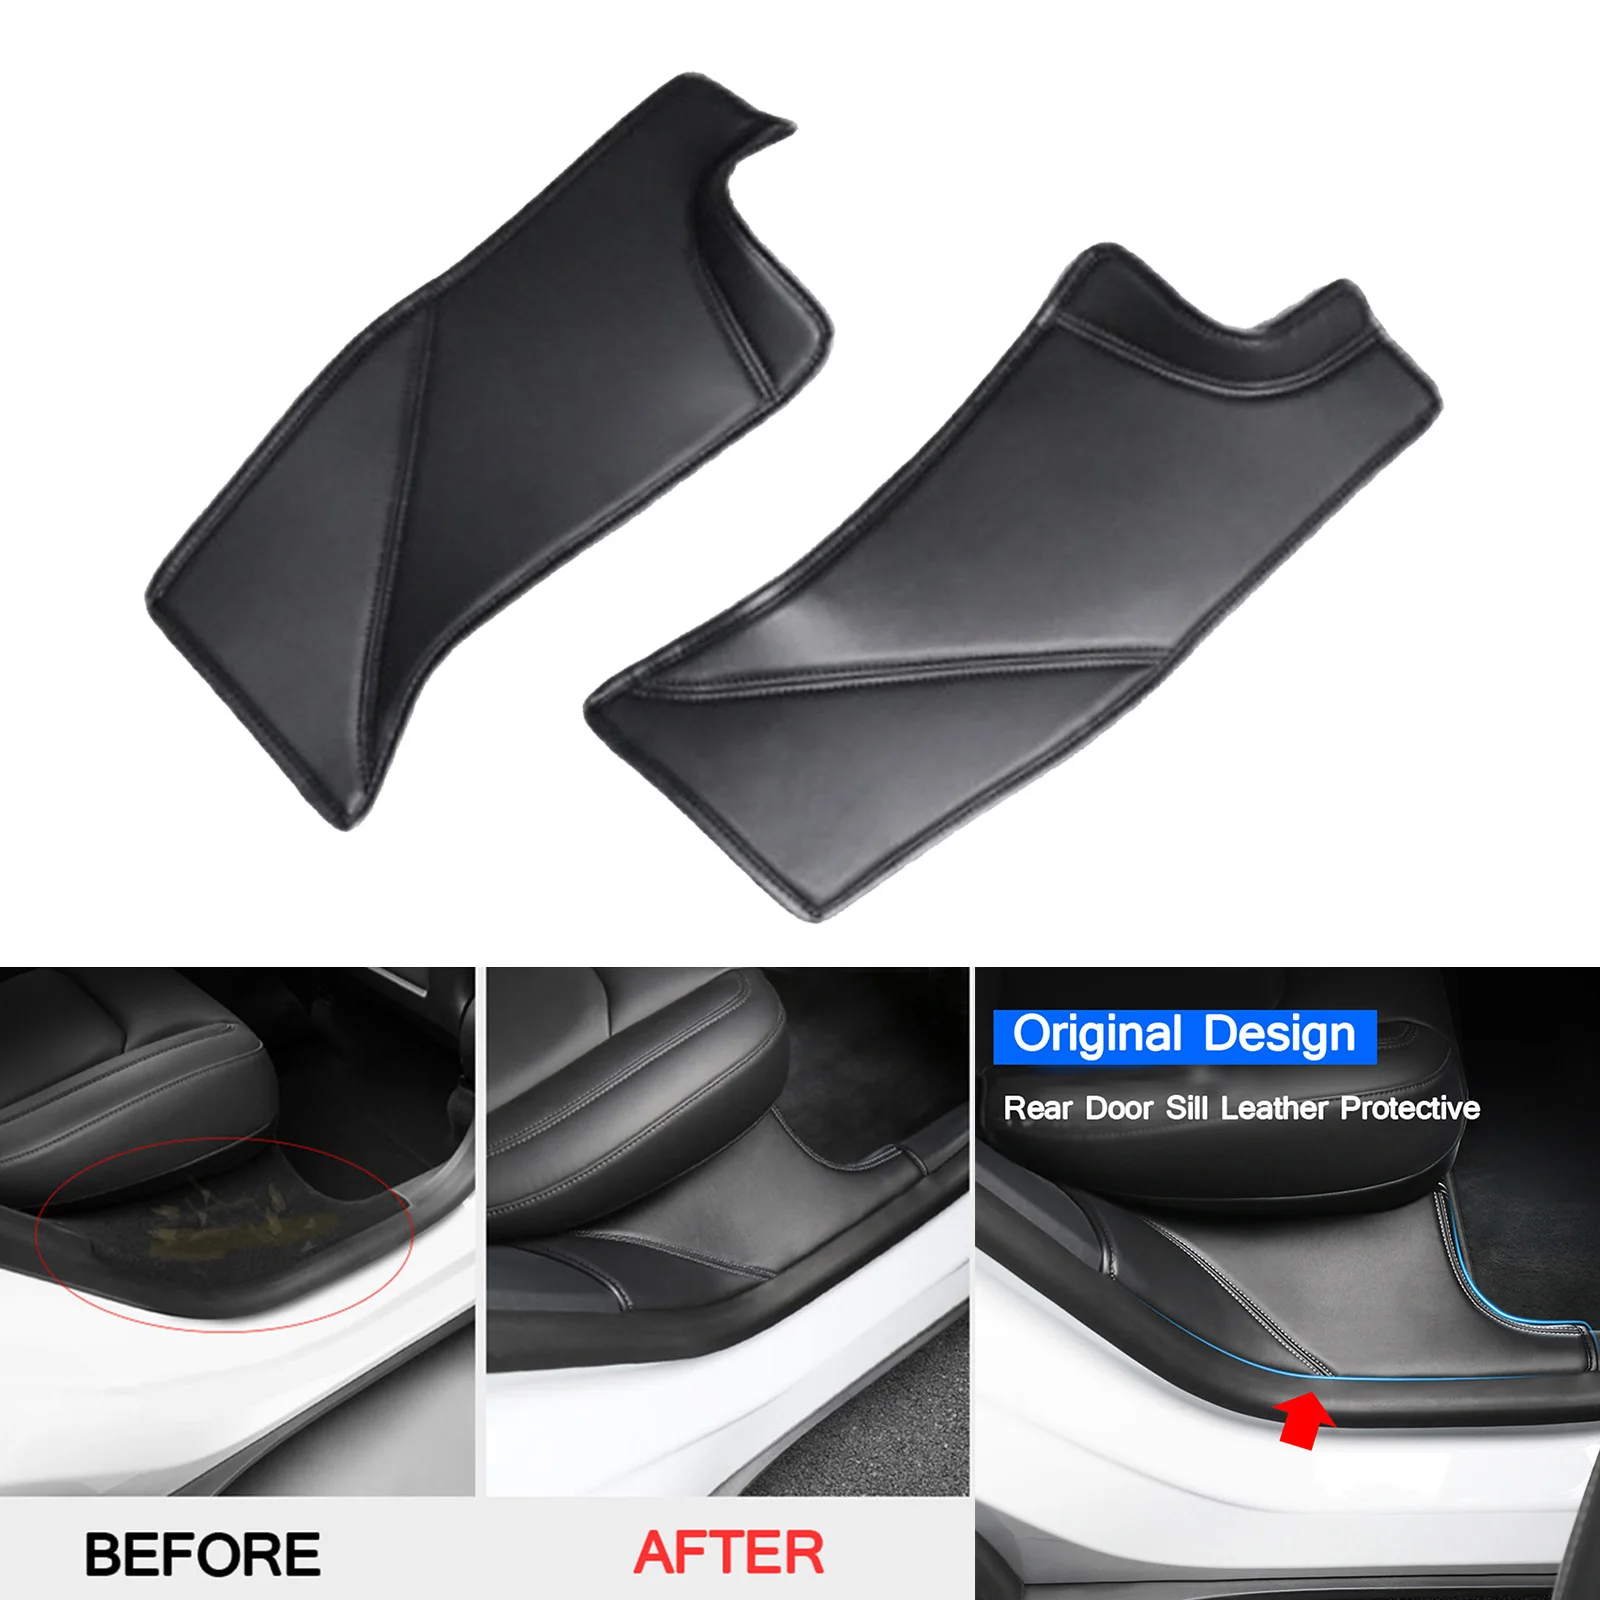 2x Car Rear Door Sill Protector Cover Trim For Tesla Model Y, PU Leather